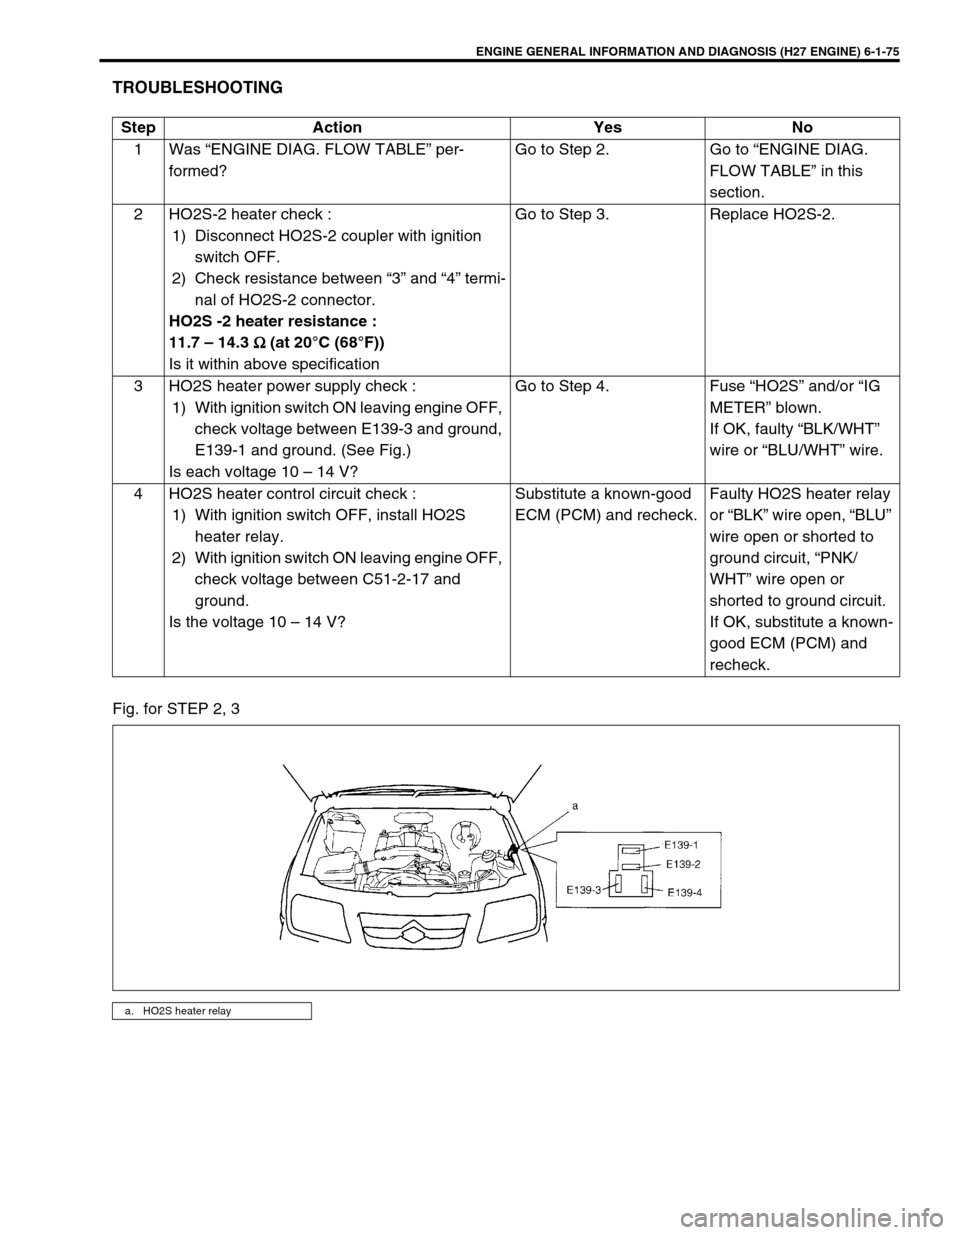 SUZUKI GRAND VITARA 2001 2.G Owners Manual ENGINE GENERAL INFORMATION AND DIAGNOSIS (H27 ENGINE) 6-1-75
TROUBLESHOOTING
Fig. for STEP 2, 3Step Action Yes No
1 Was “ENGINE DIAG. FLOW TABLE” per-
formed?Go to Step 2. Go to “ENGINE DIAG. 
F